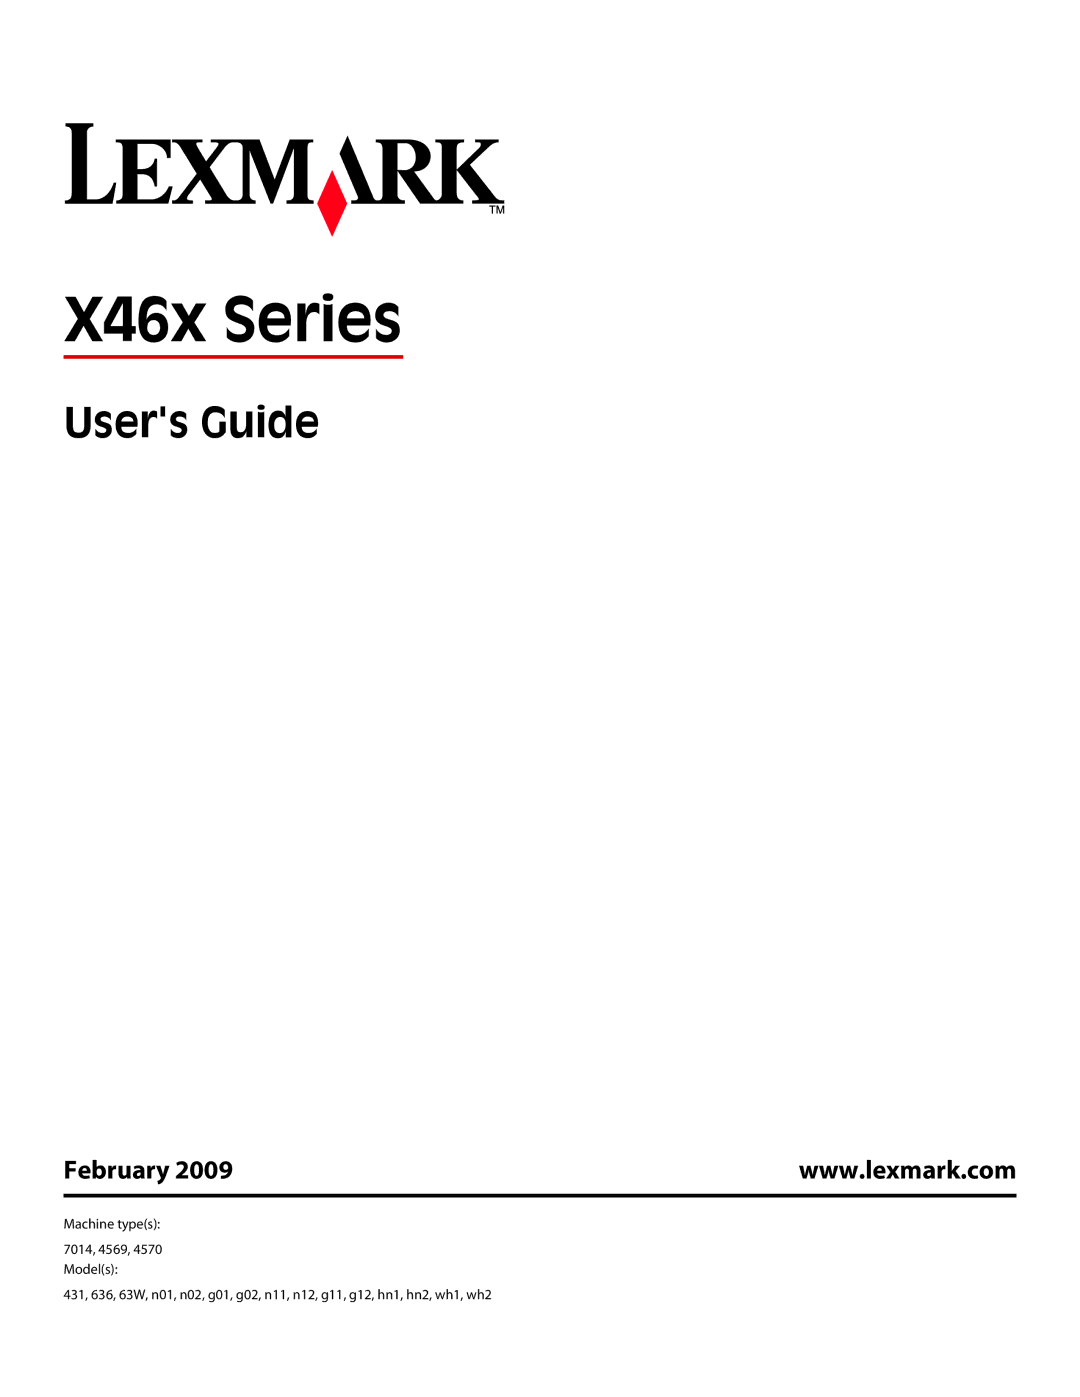 Lexmark X464de, X466de, 431, 63W, 636, g02, g12, g11, g01, hn2, hn1, wh2, wh1, n11, n12, X46X, X466dte manual Users Guide, February 